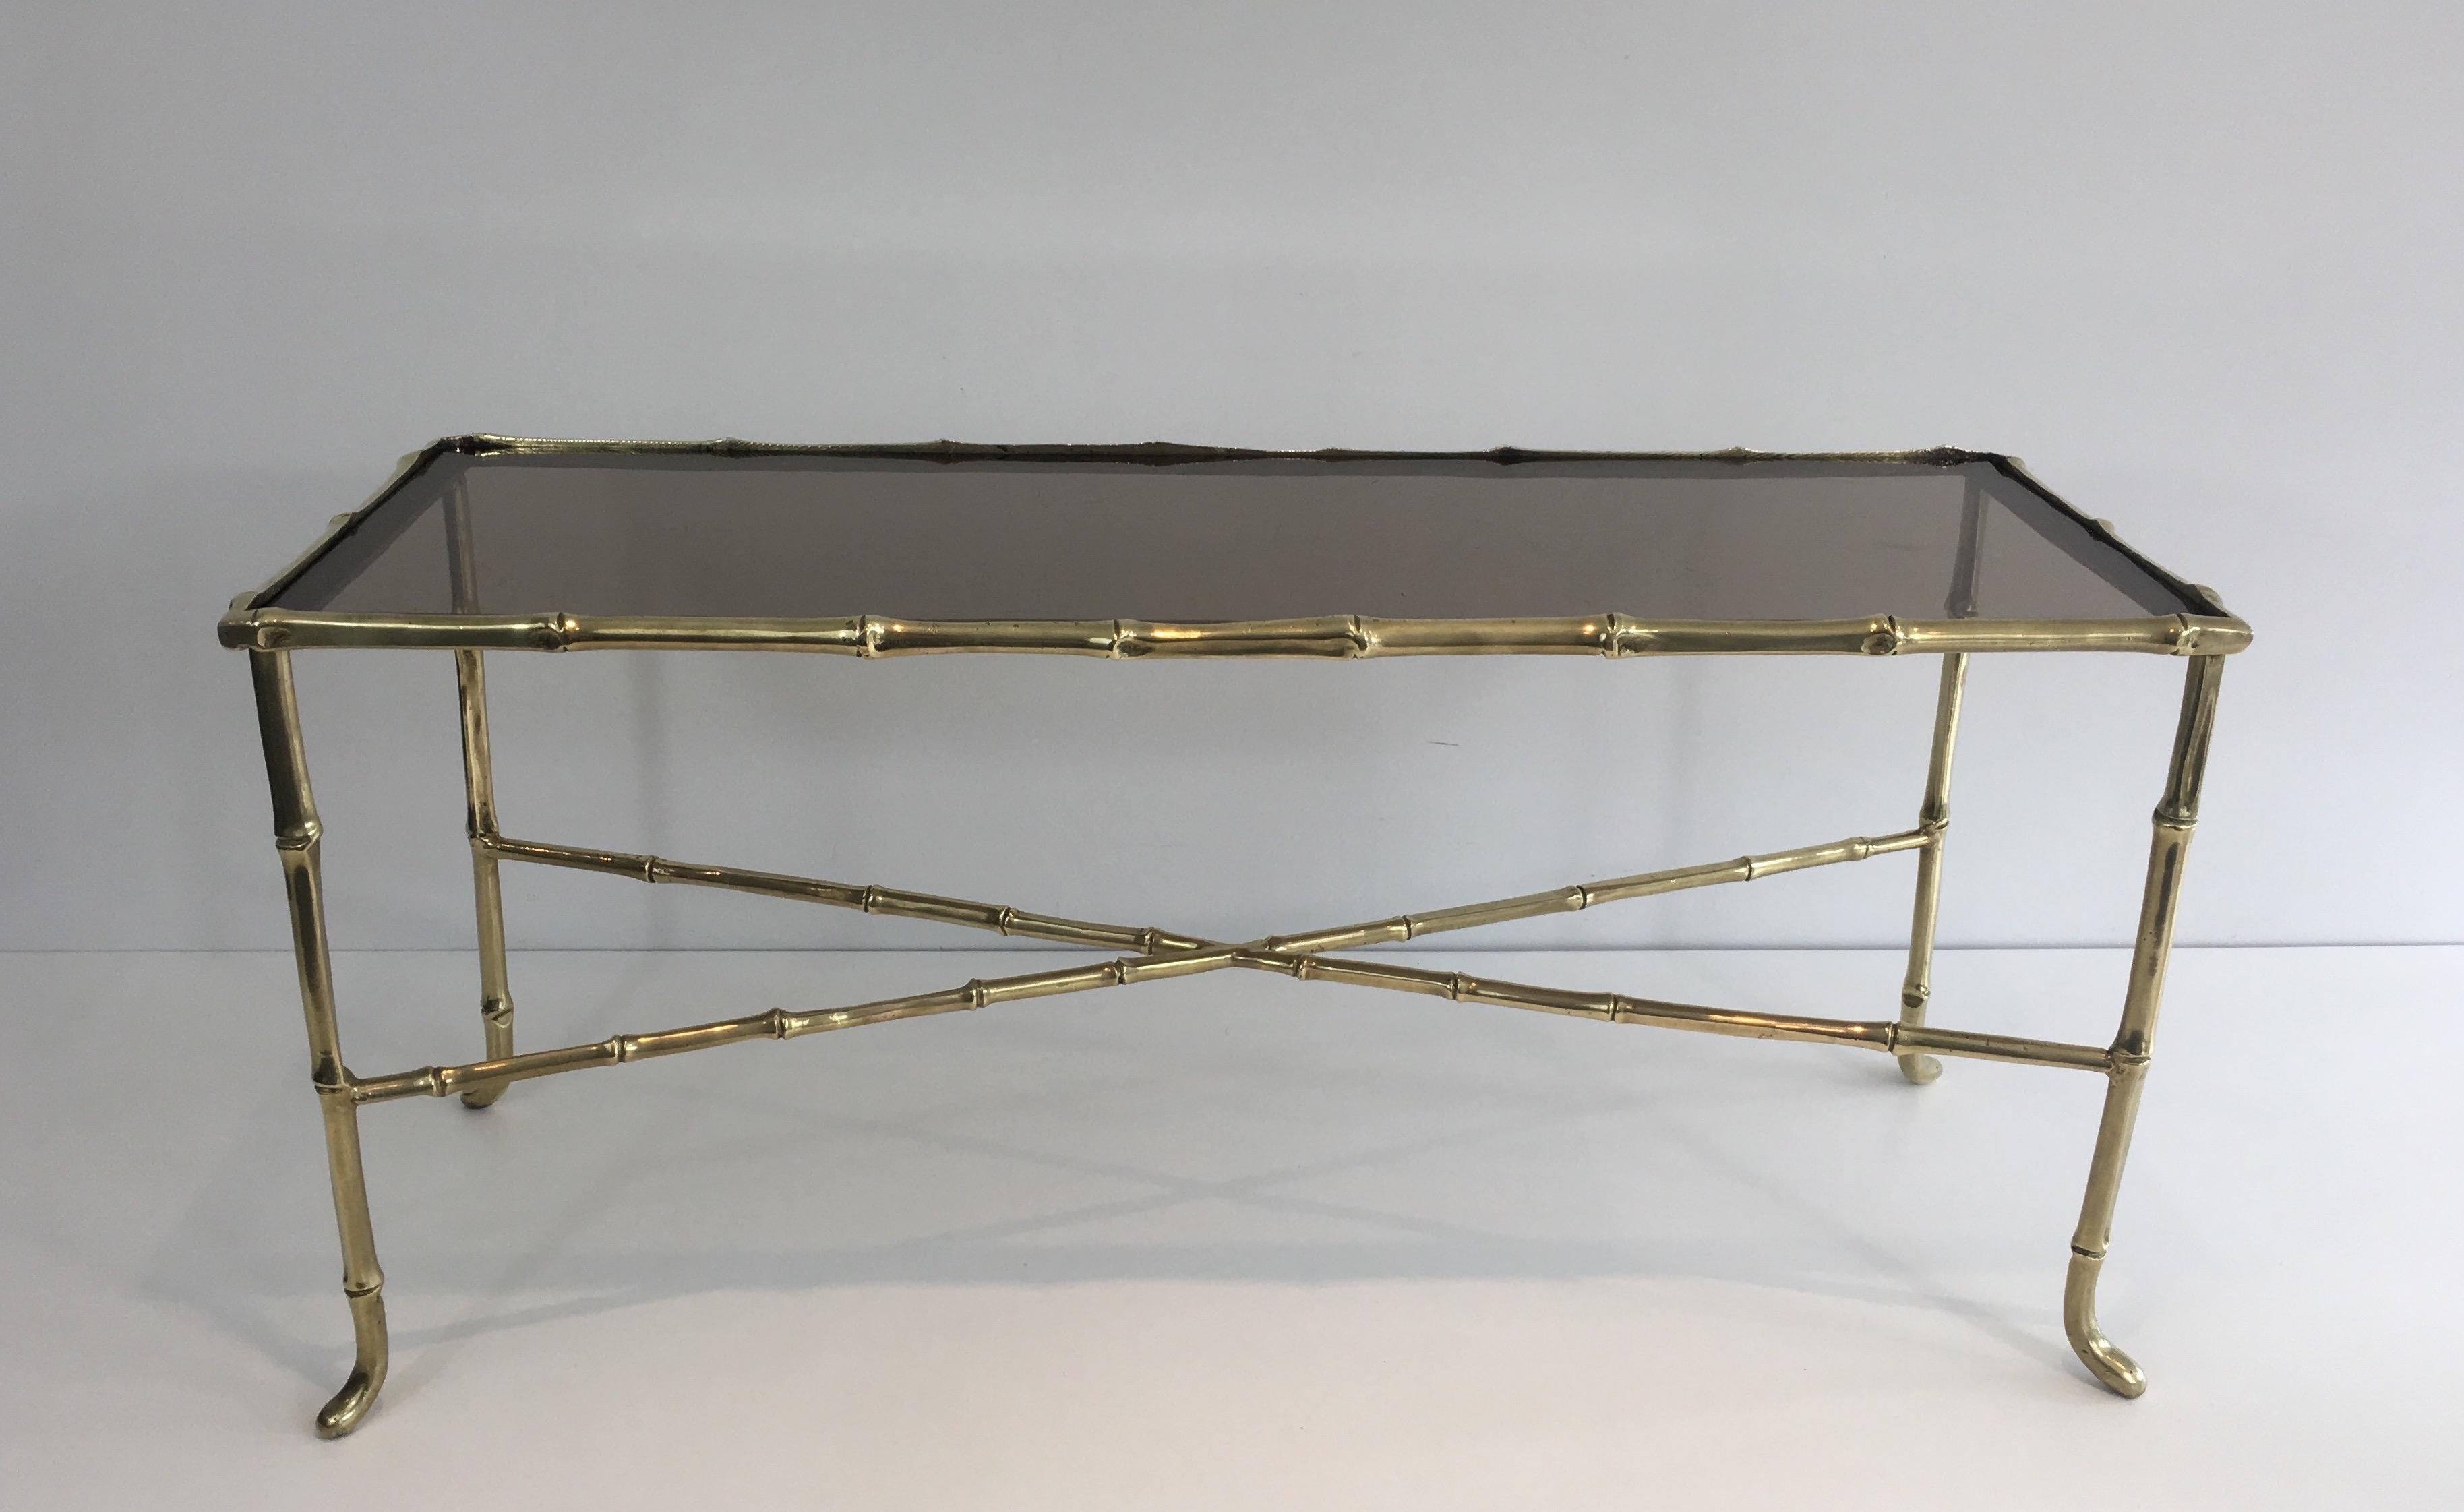 This very nice small coffee table is made of a beautiful faux-bamboo bronze with a smoked glass on top. This is a very Fine work by famous French maker Maison Baguès, circa 1940.